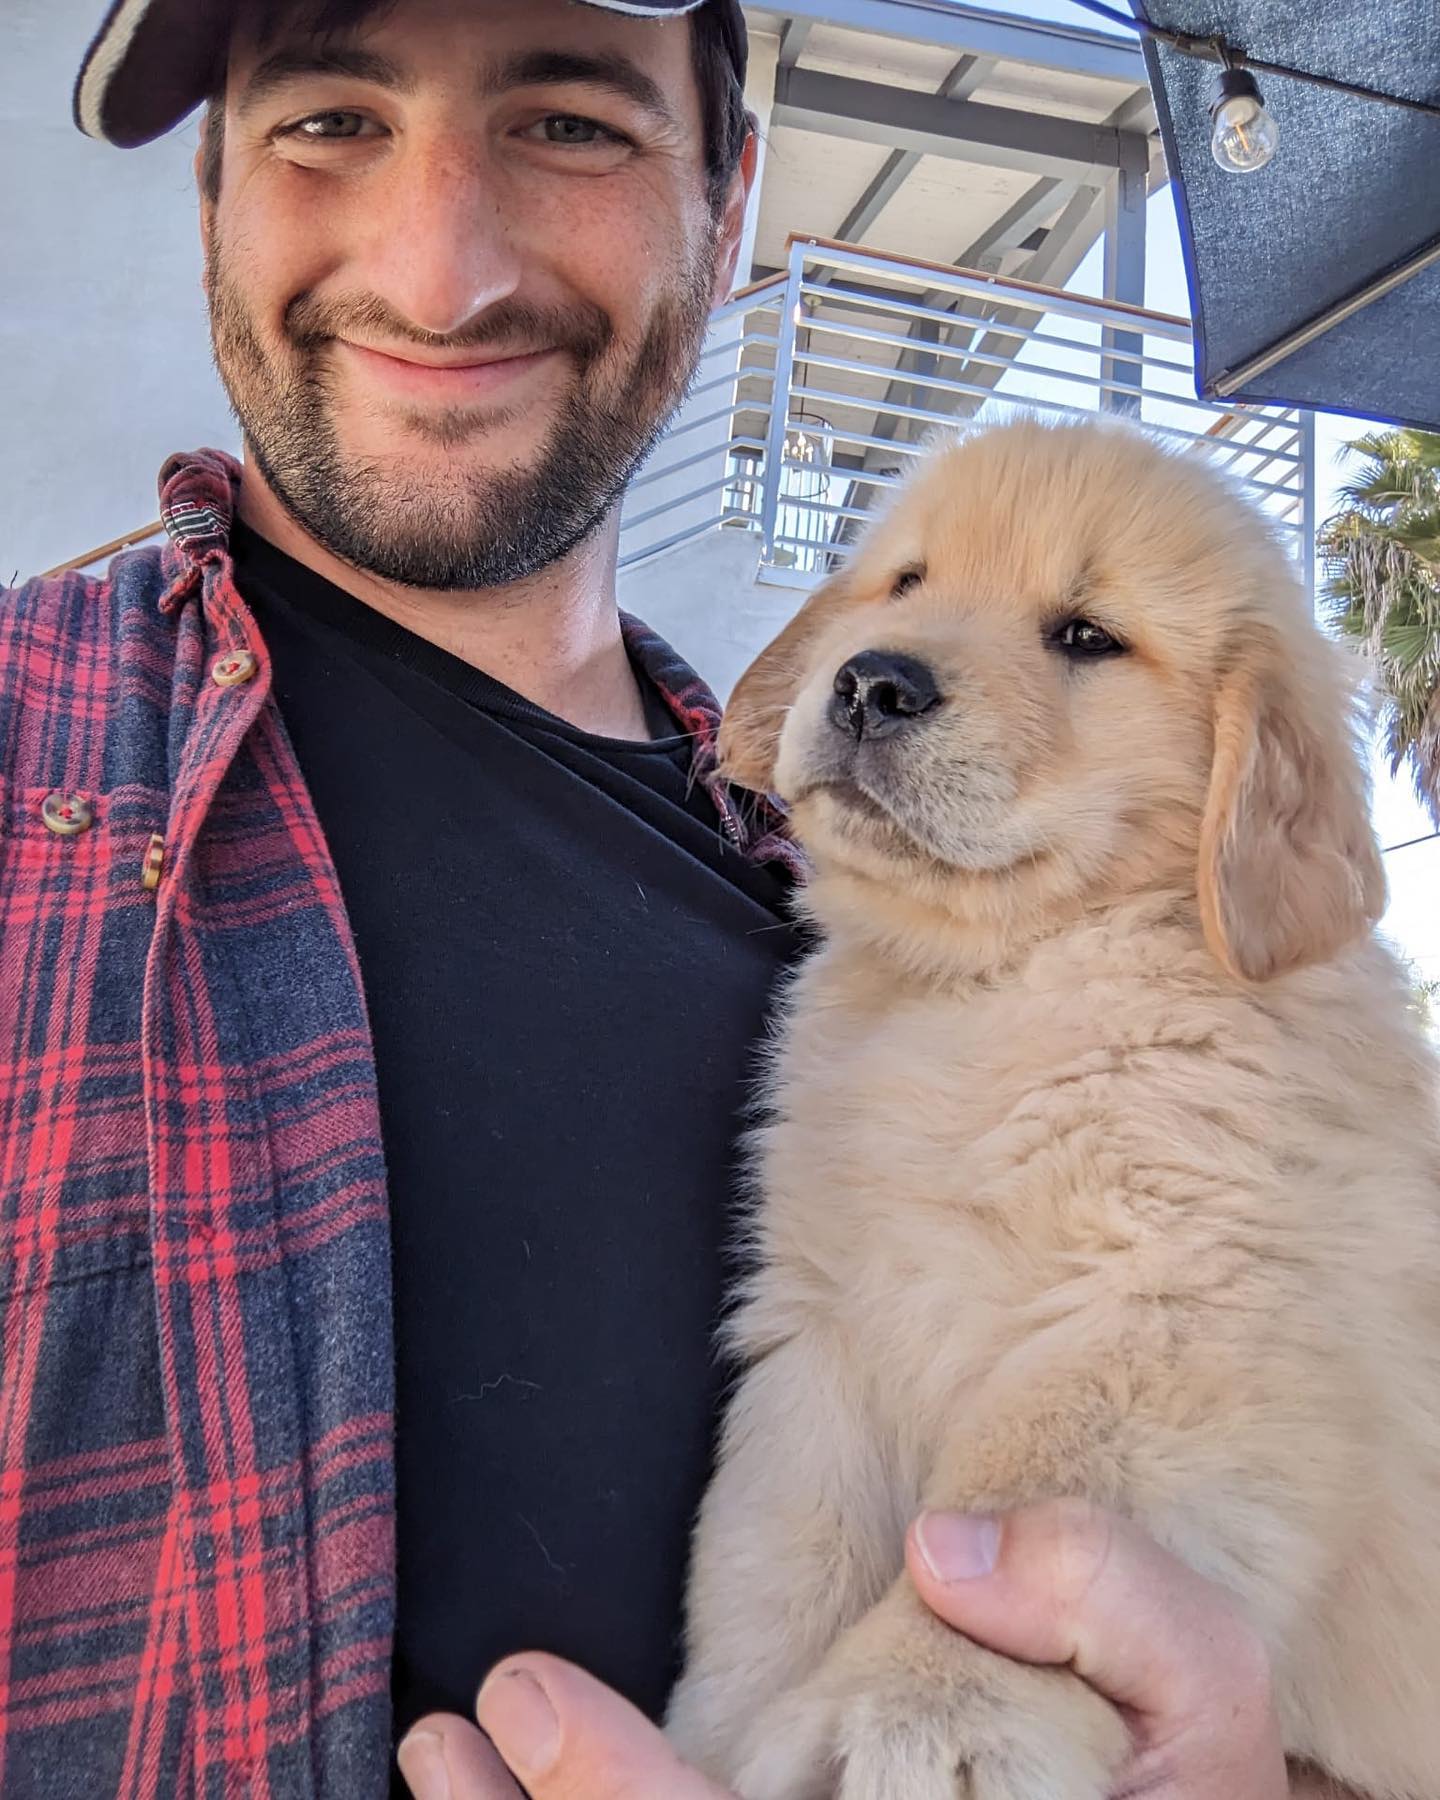 Man smiling while holding a golden retriever puppy.